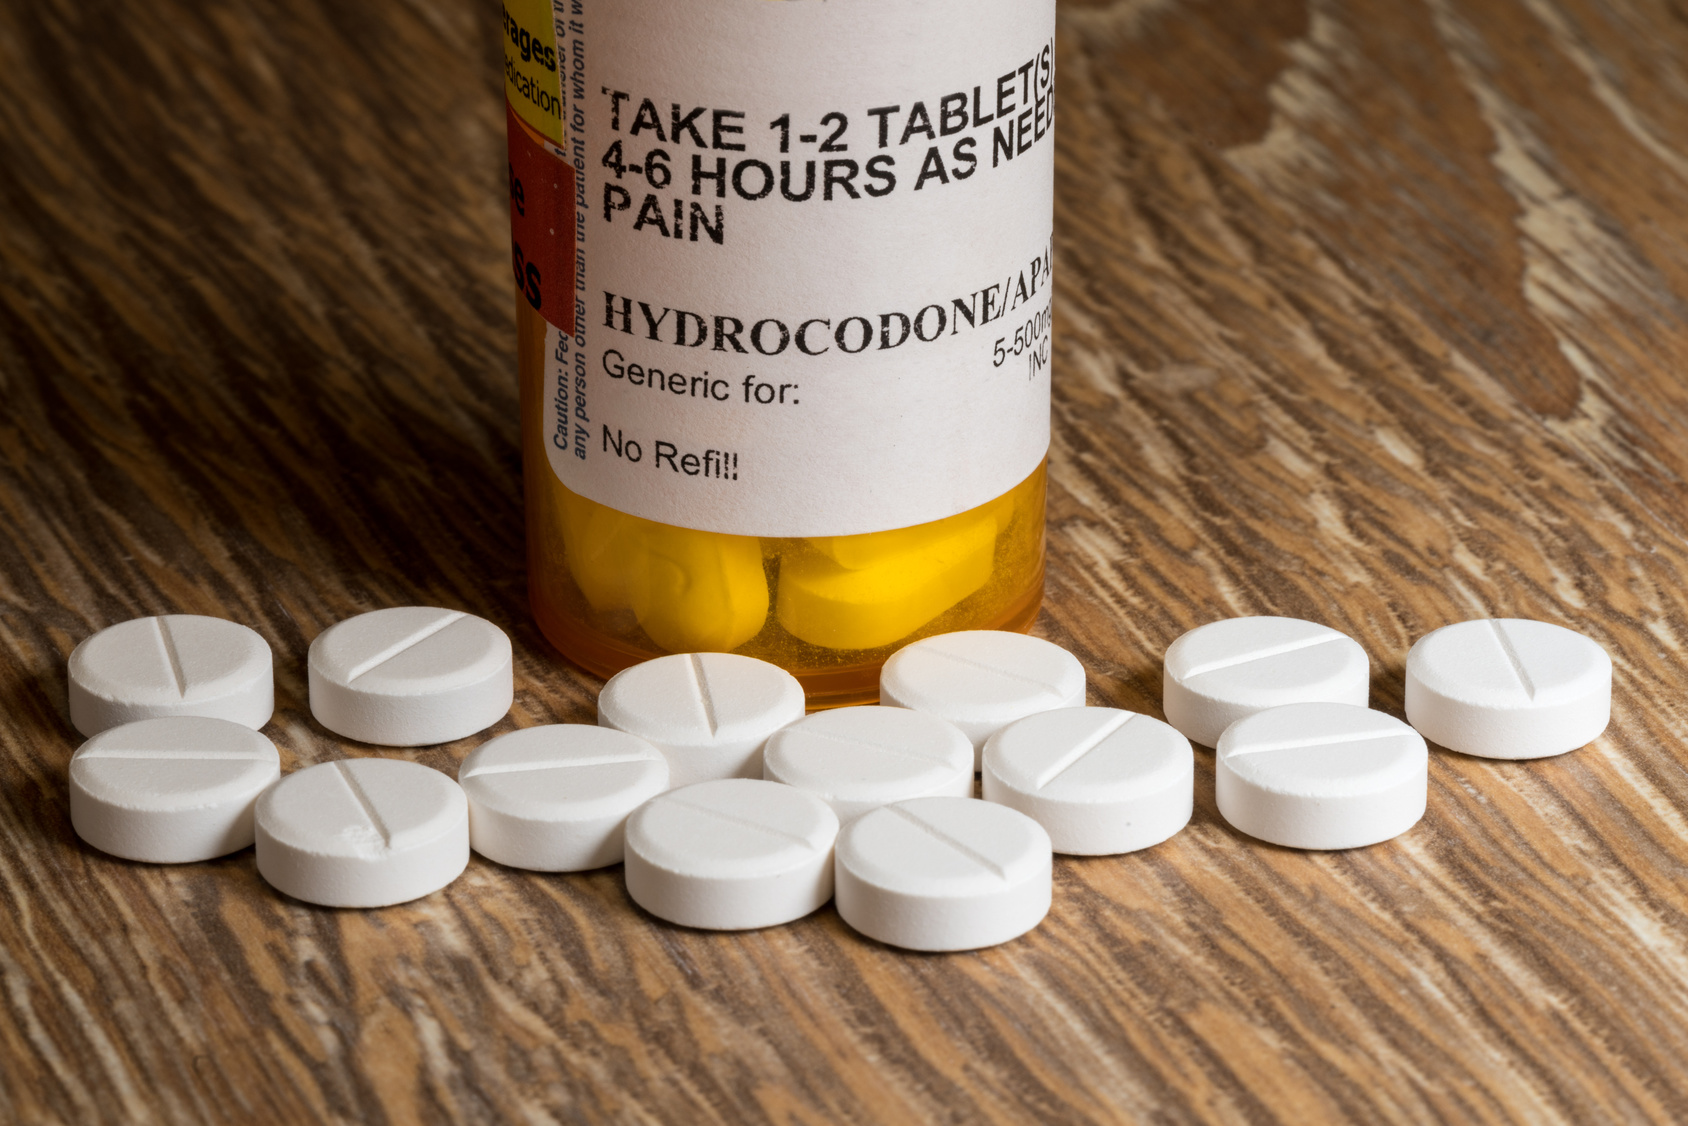 Are Pharmaceutical Companies to Blame for the Opioid Epidemic?